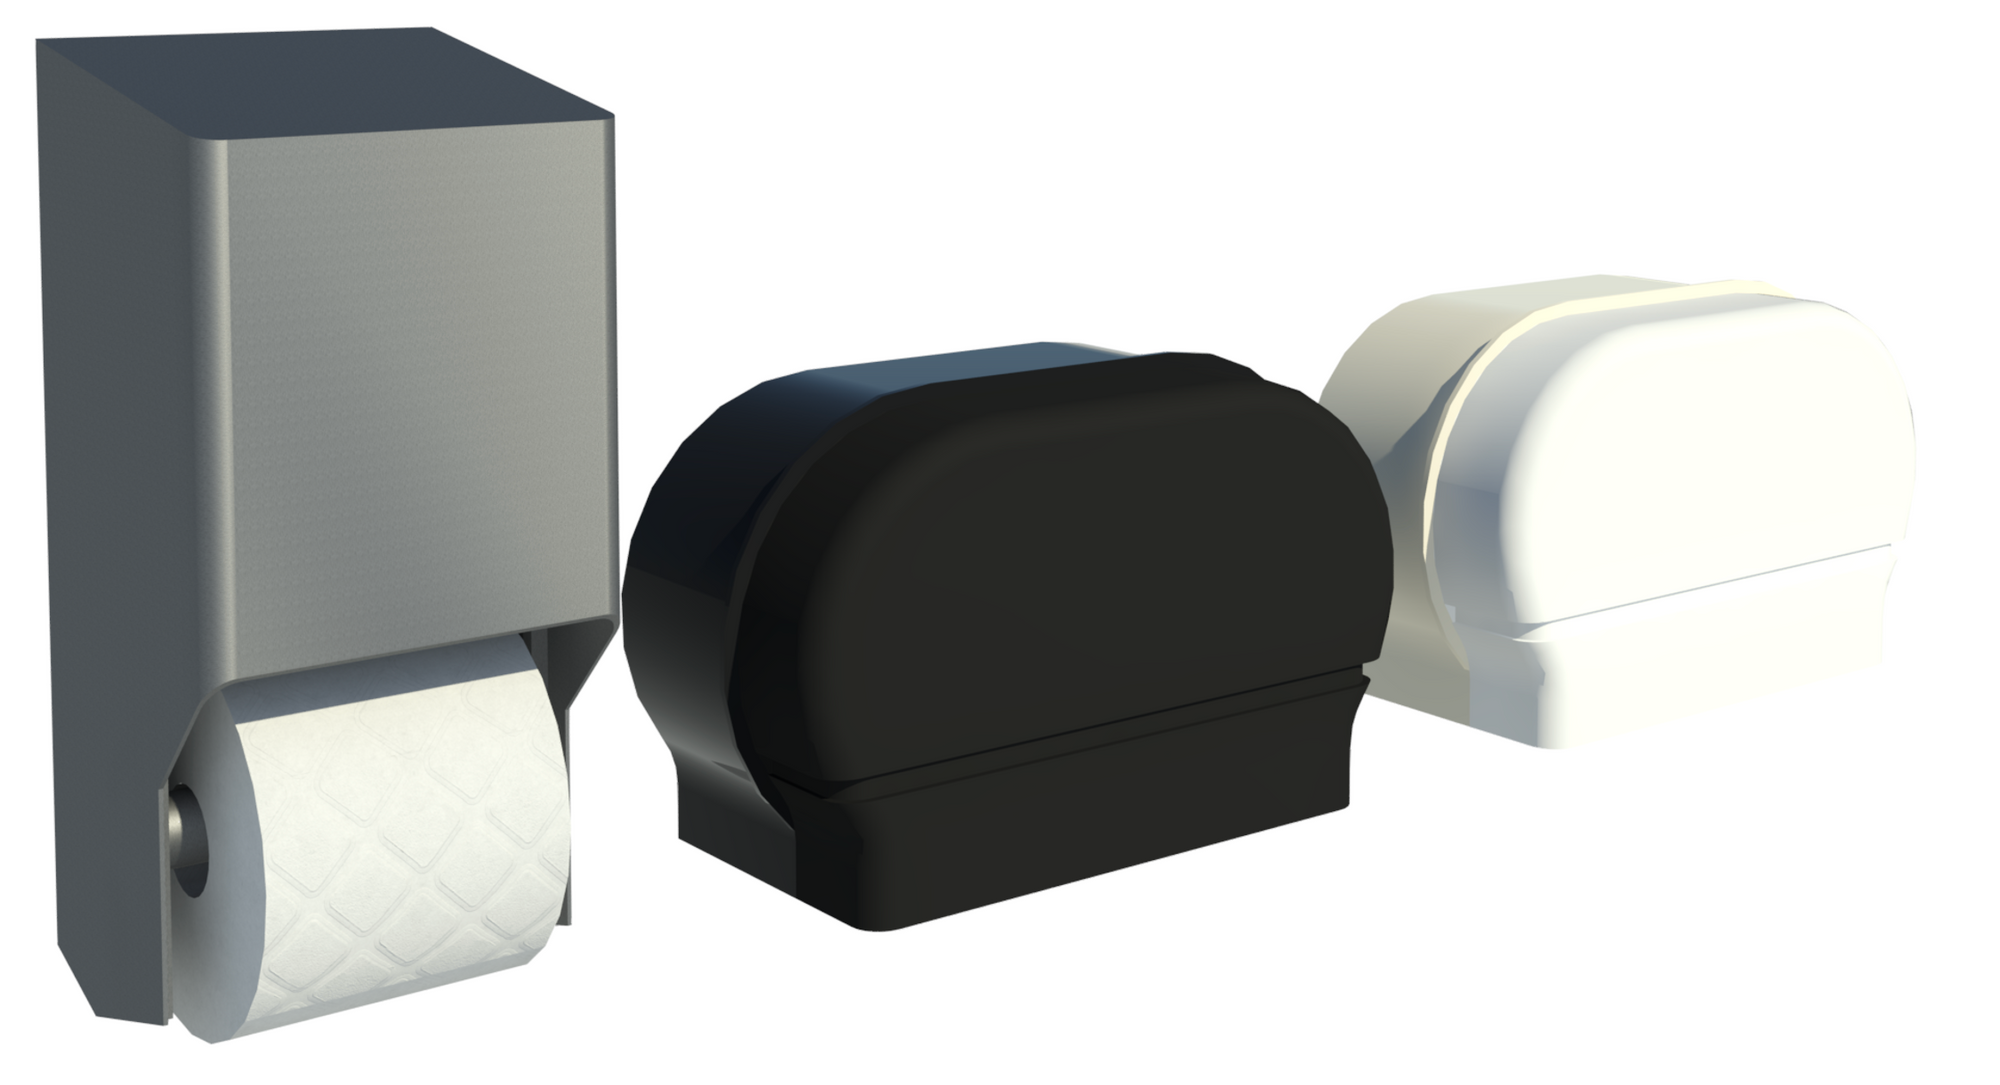 Revit ray trace showing wall-mounted toilet paper dispensers.